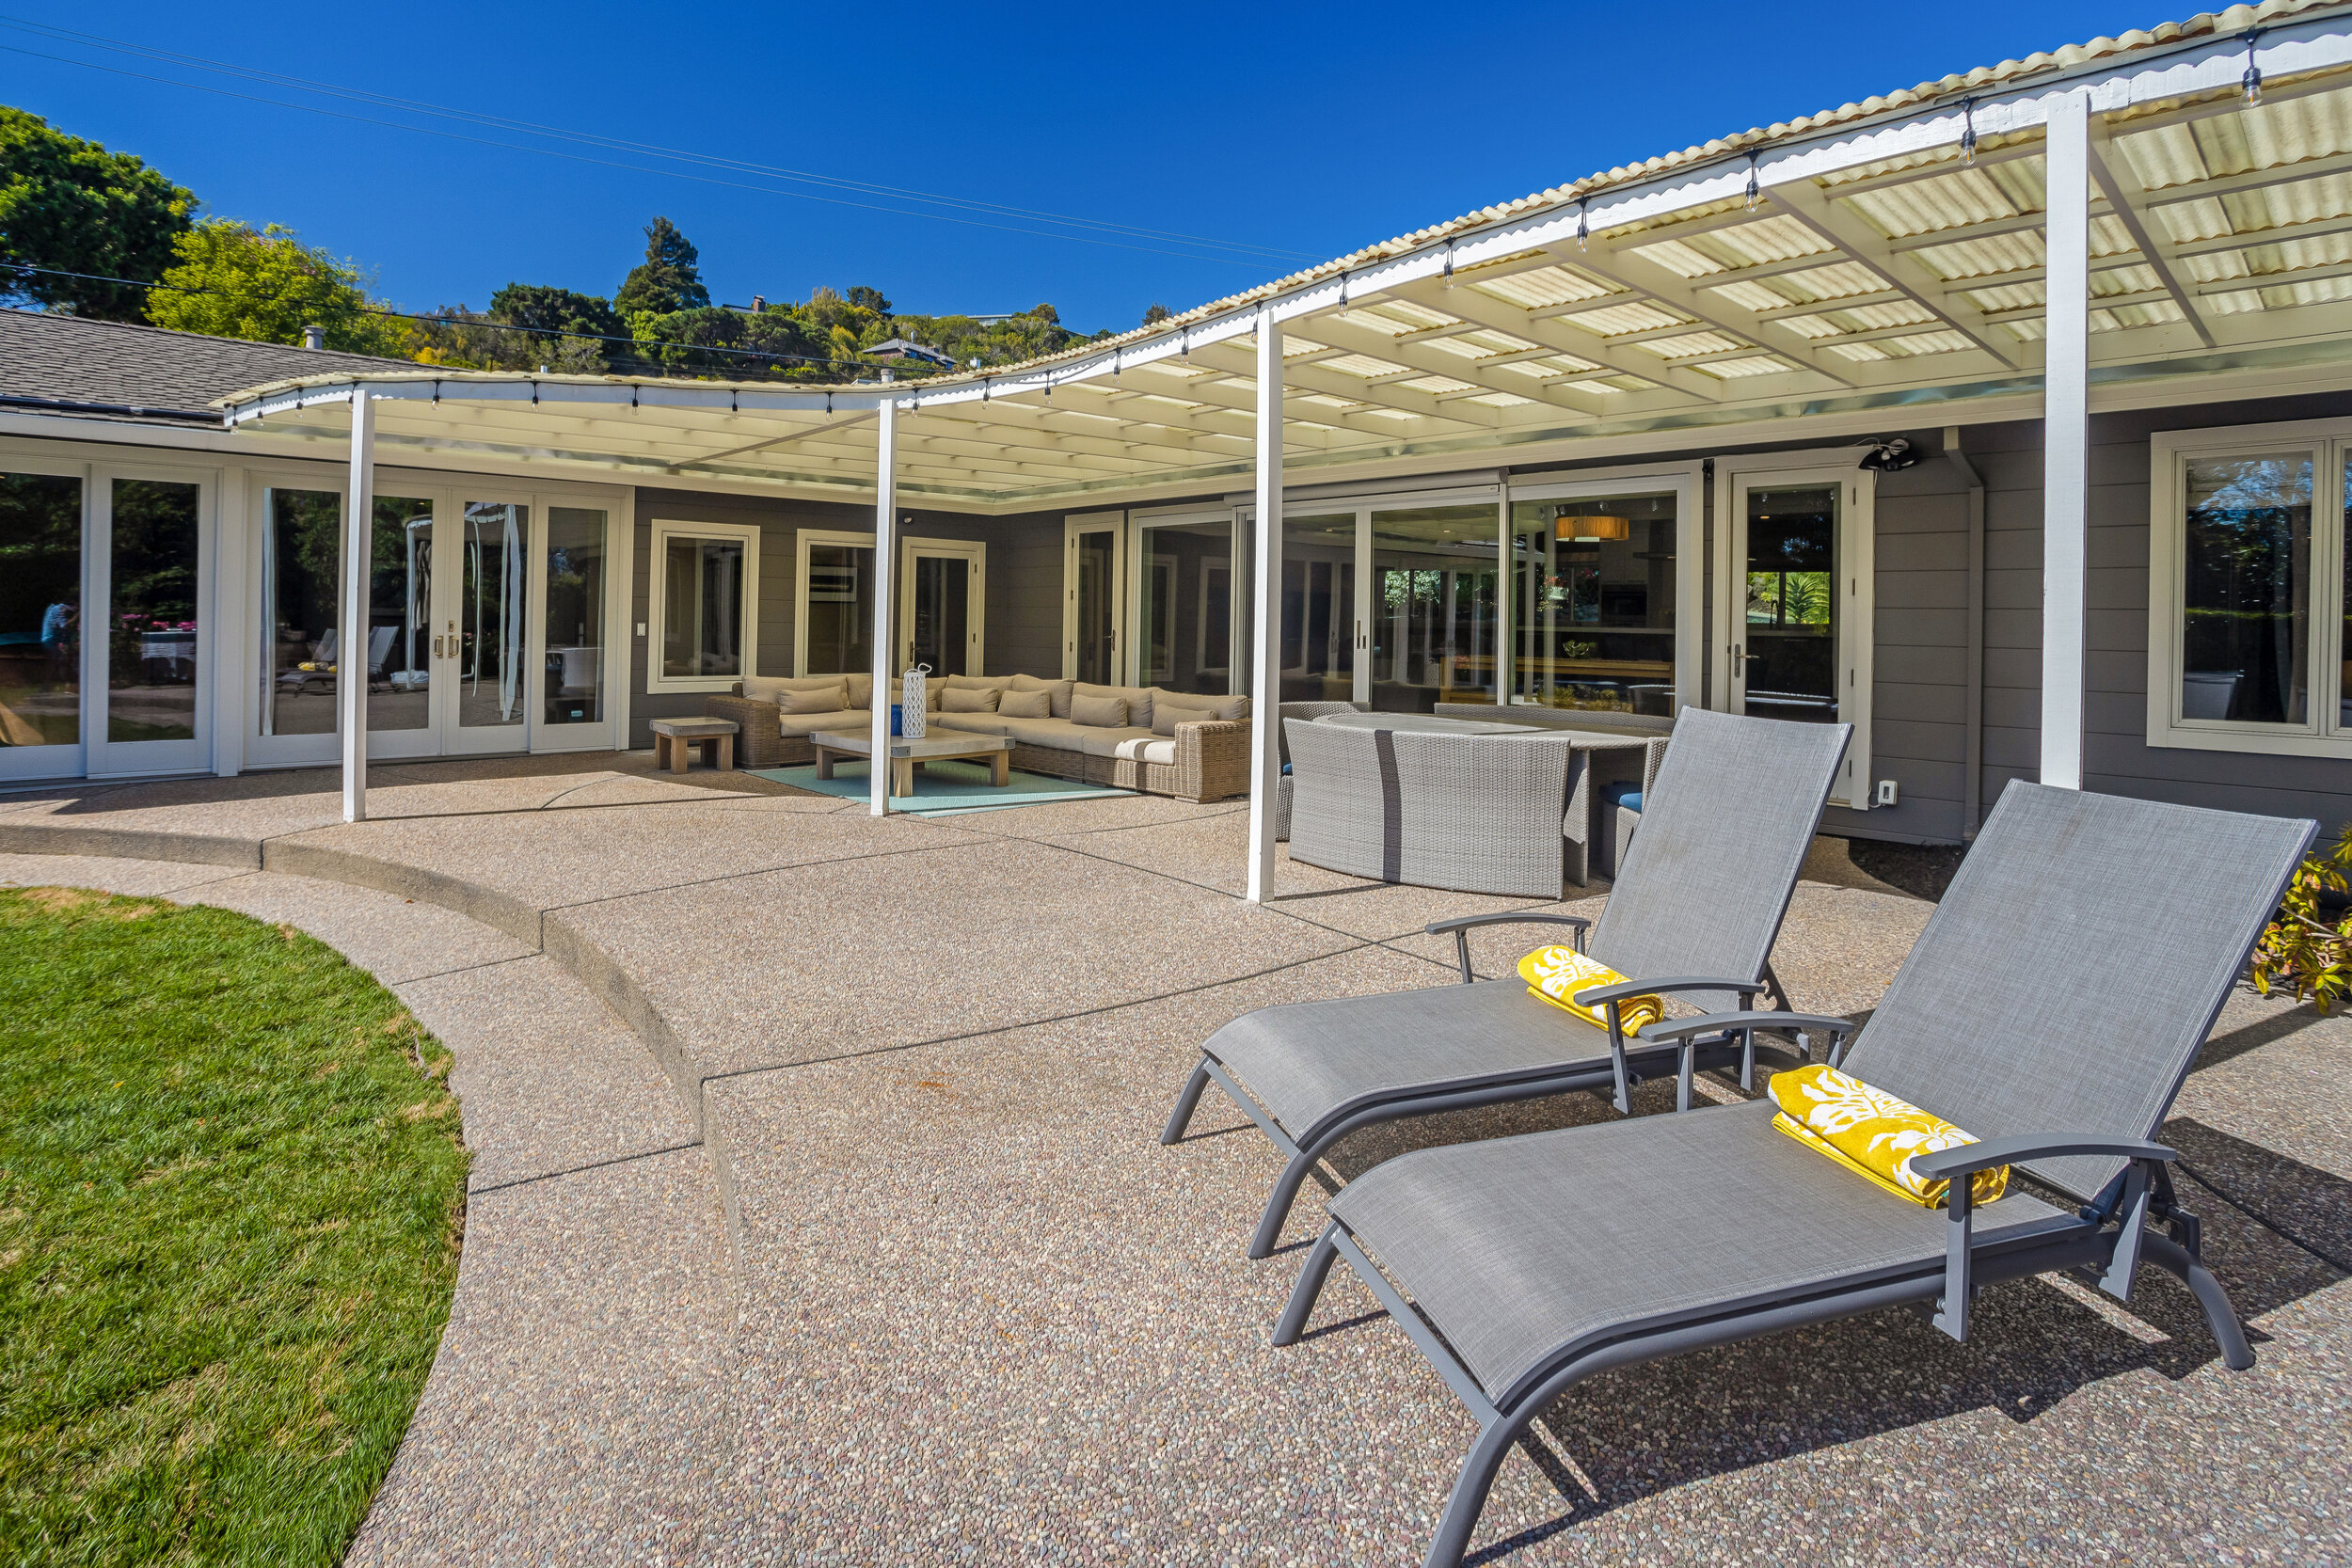 Own Marin Barr Haney Whitney Potter For Sale 11 Allensby Lane, San R California Marin County #1 Real Esate Agents-22.jpg